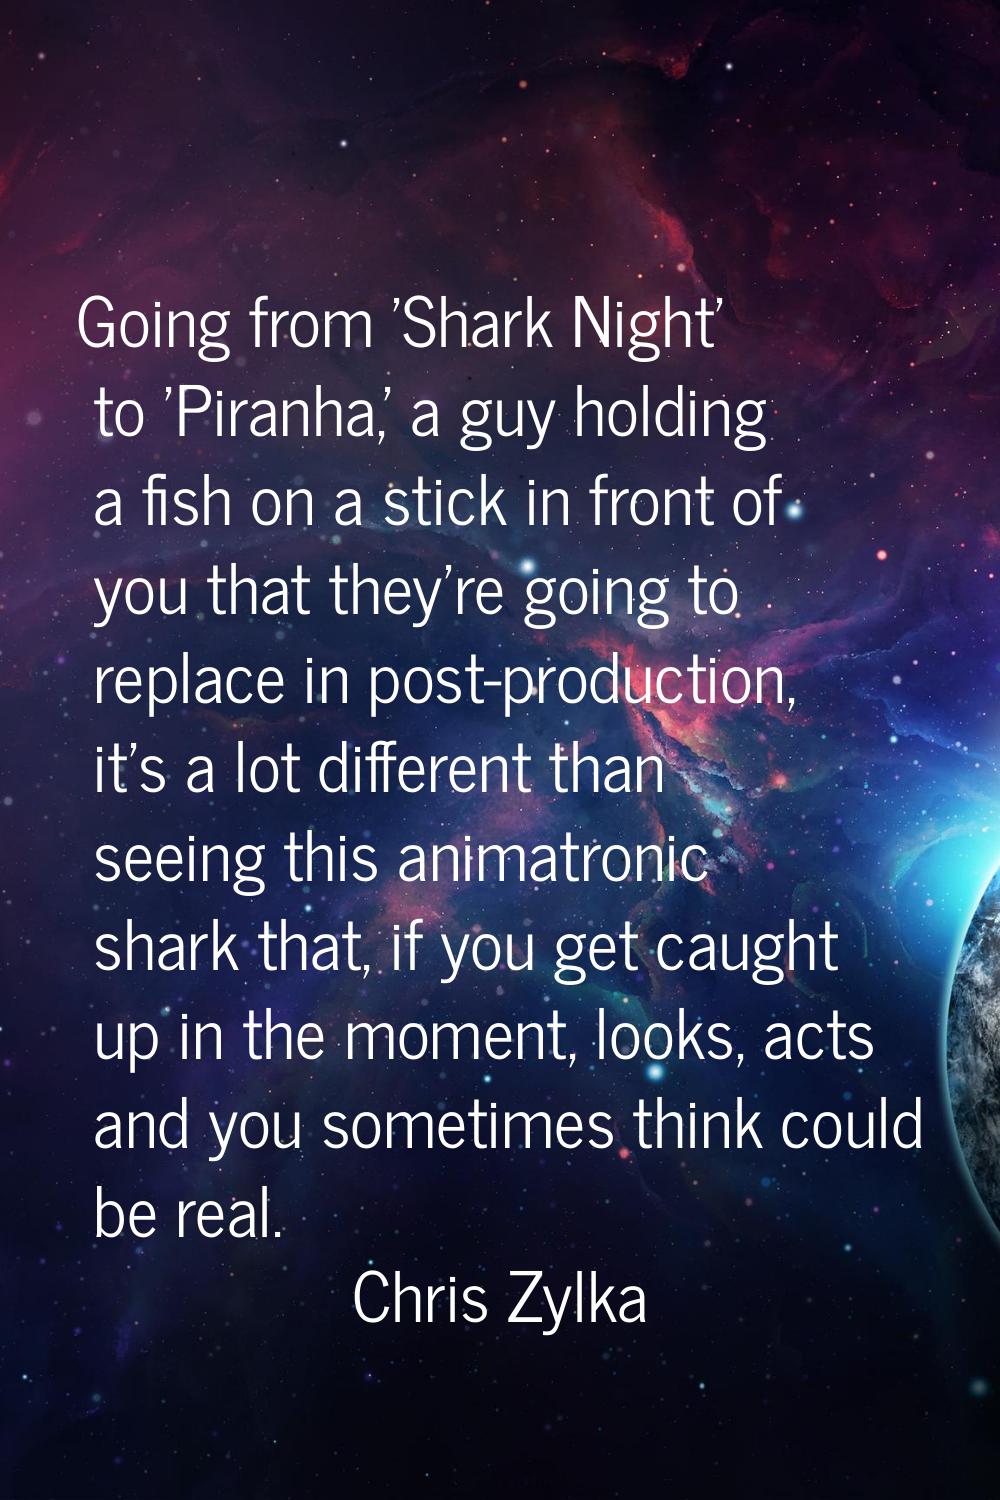 Going from 'Shark Night' to 'Piranha,' a guy holding a fish on a stick in front of you that they're